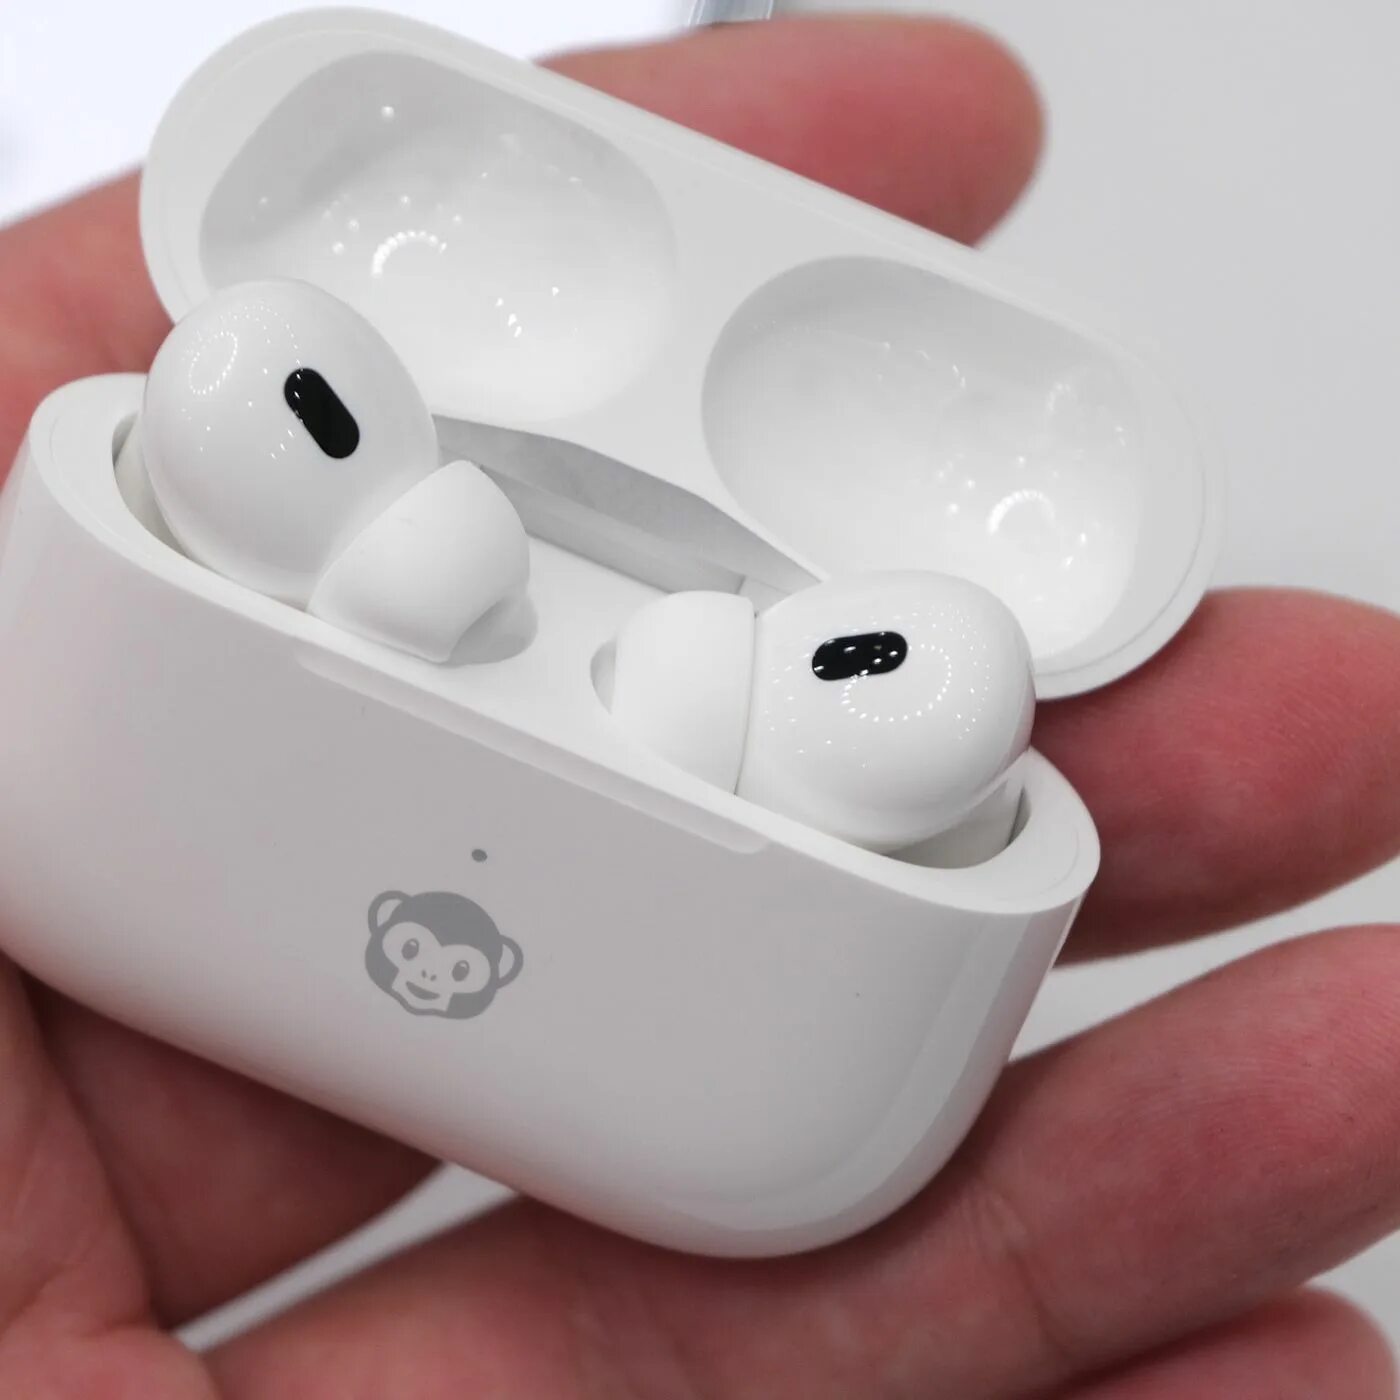 Airpods pro дата. Apple AIRPODS Pro 2. AIRPODS Pro 2022. Apple AIRPODS Pro 2 Generation. Apple AIRPODS Pro 3.